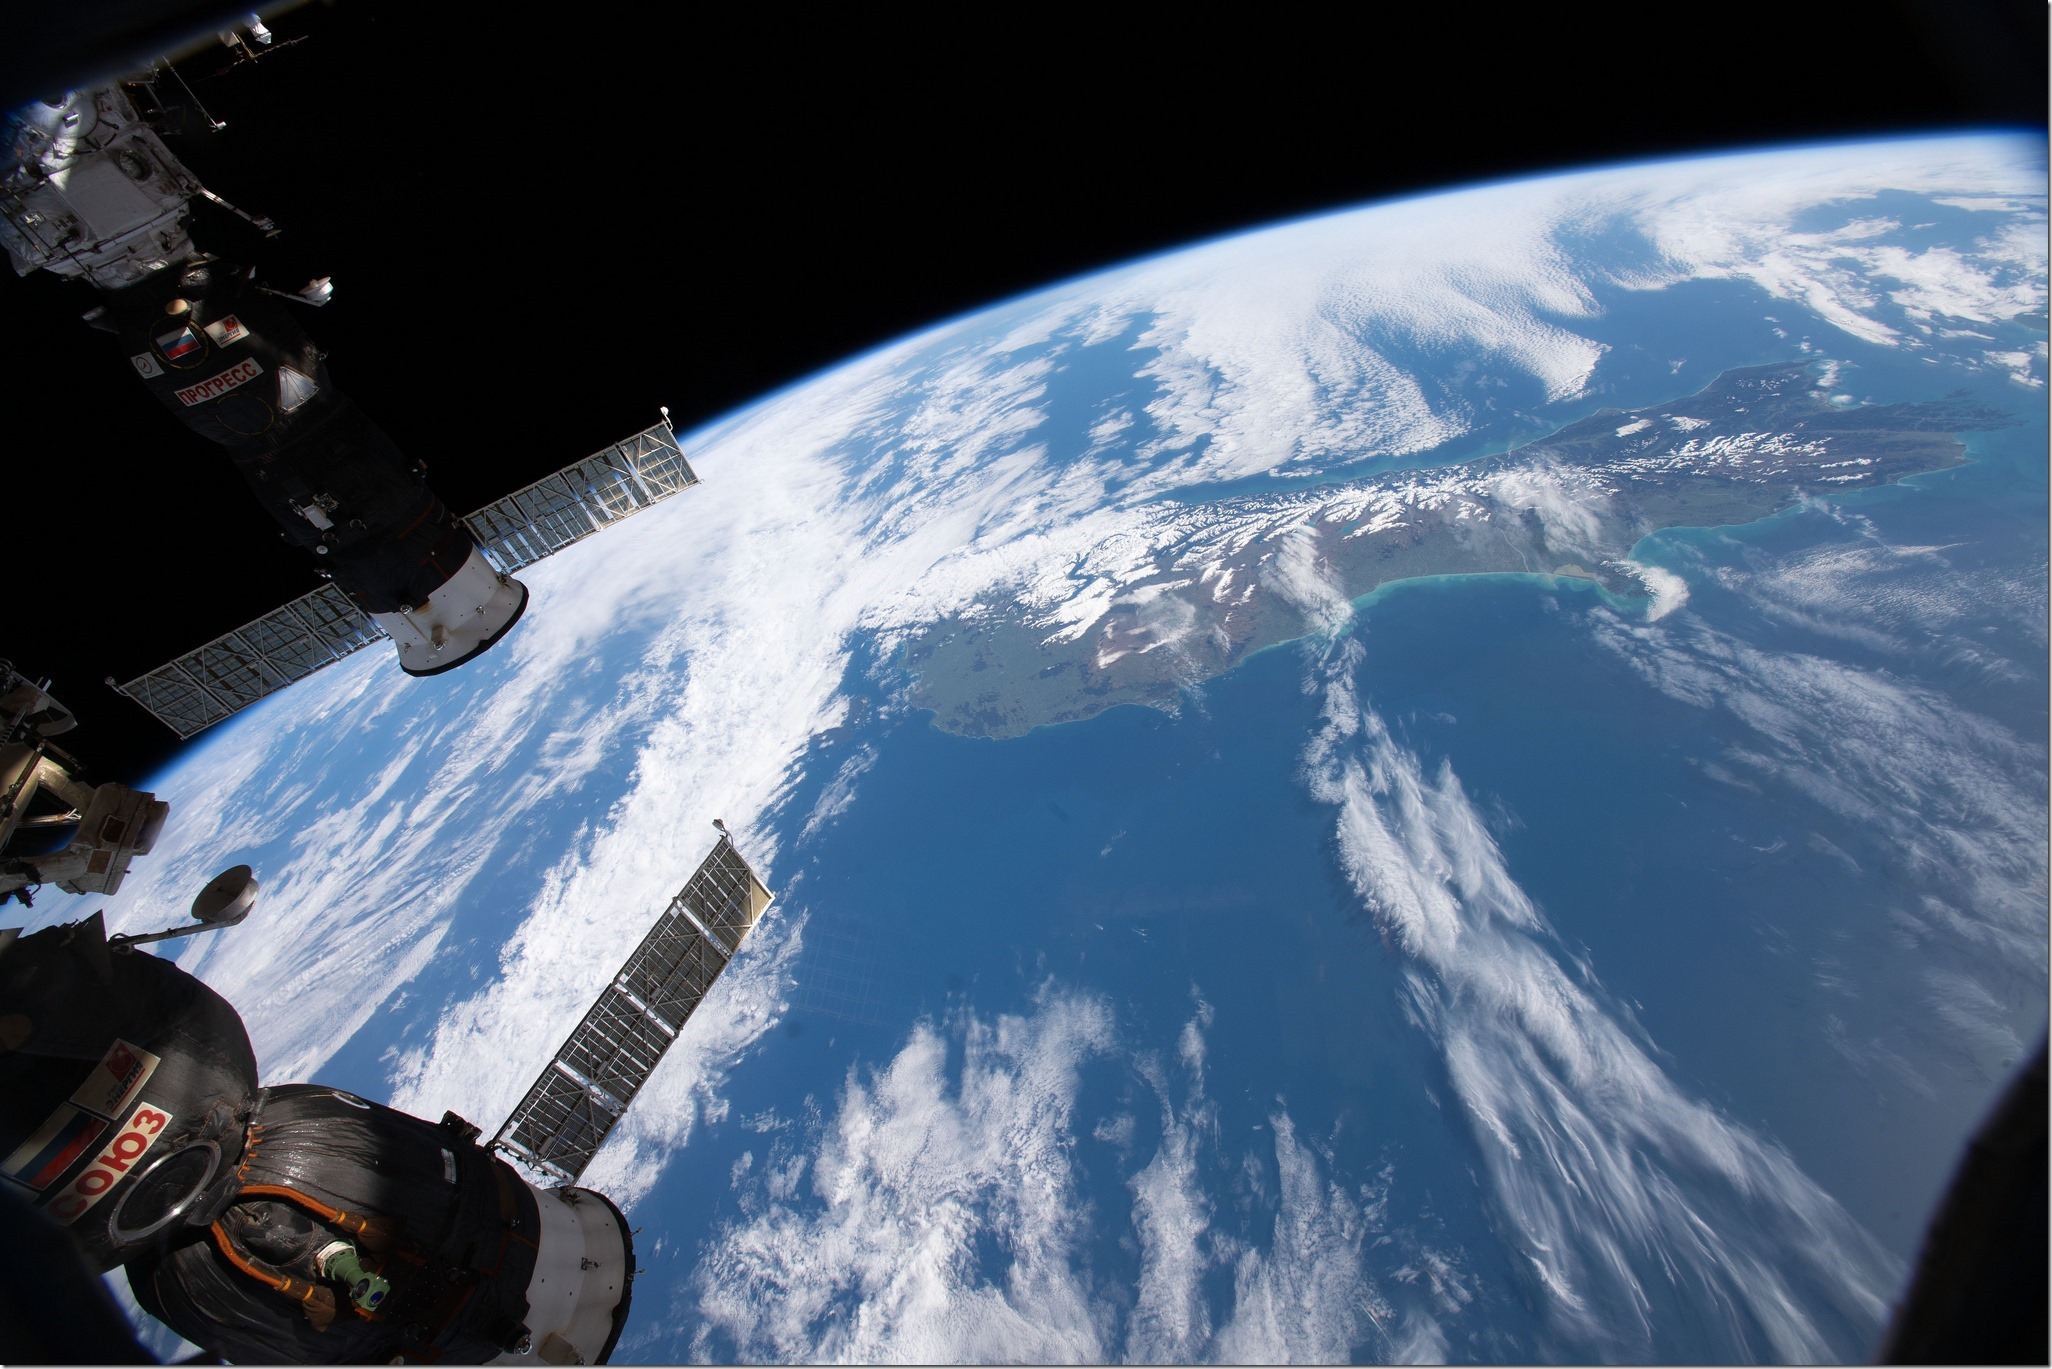 Two Russian spacecraft docked to the International Space Station, (bottom left) the Soyuz MS-09 crew ship and (top left) the Progress 70 cargo craft, are pictured as the orbital complex orbited nearly 262 miles above New Zealand. Credits: NASA